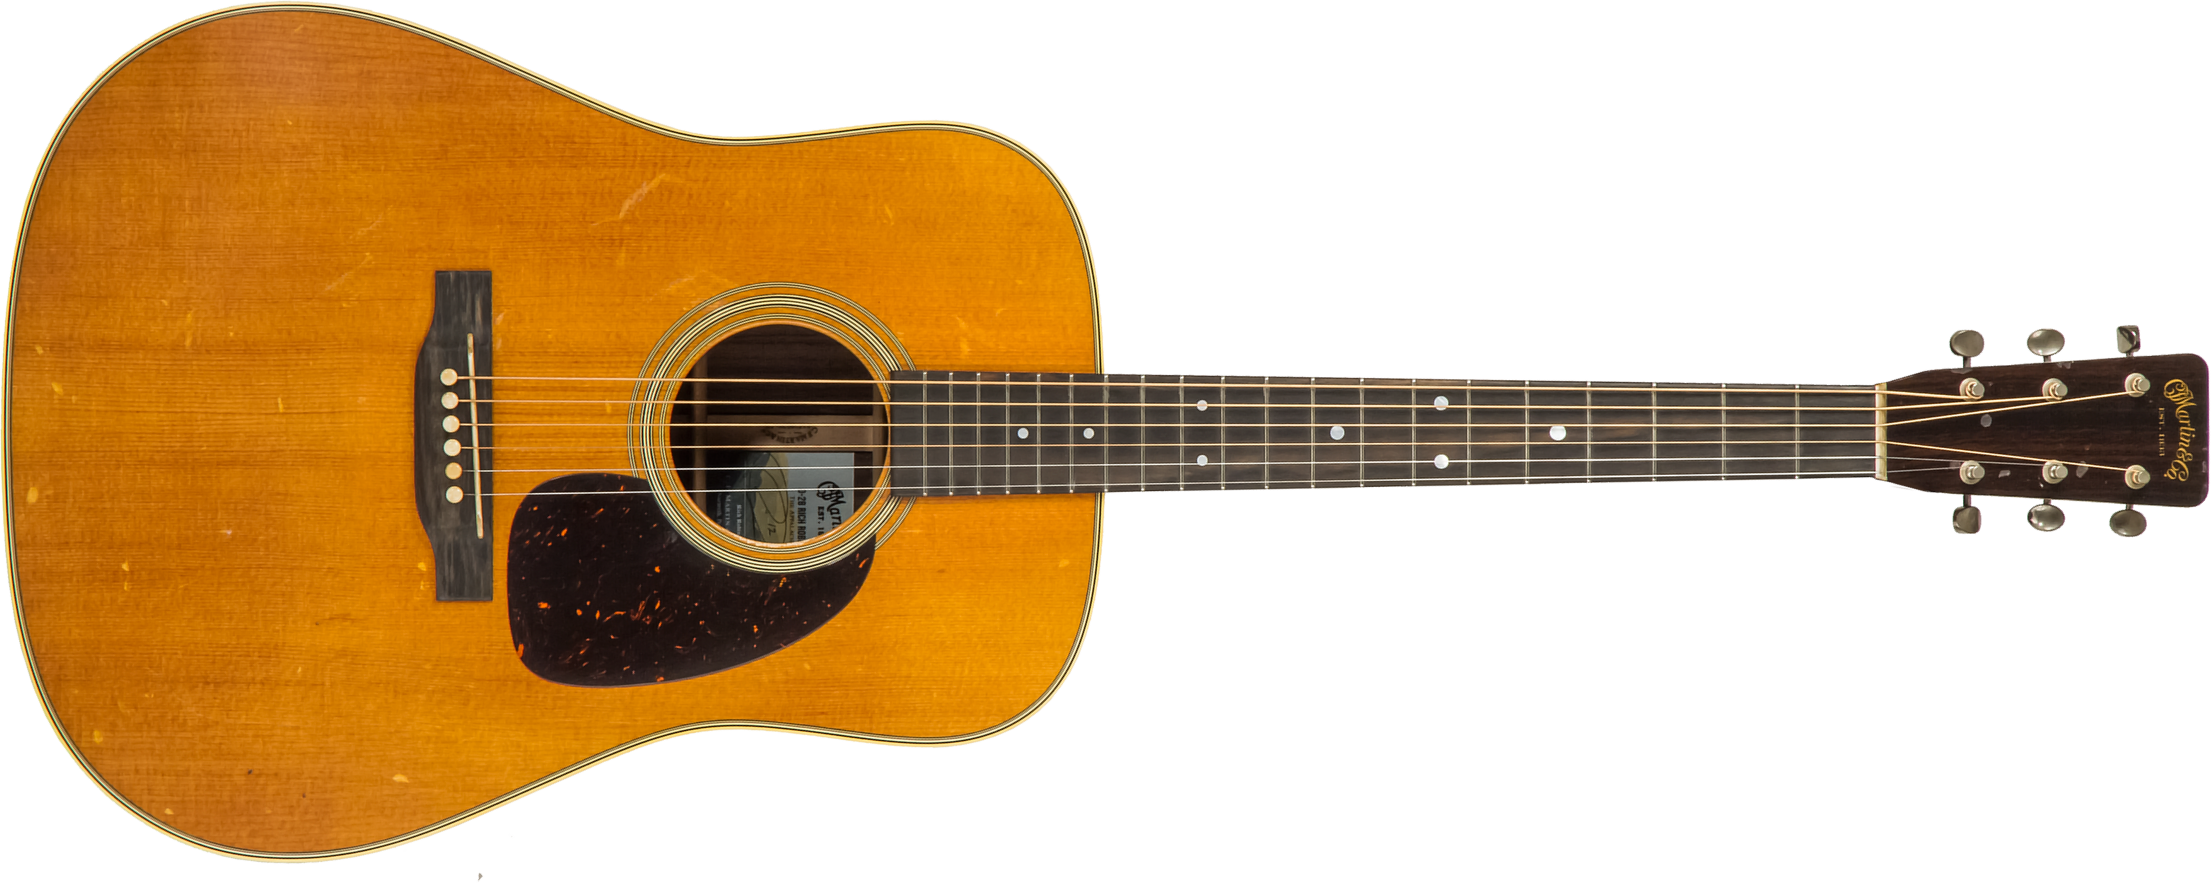 Martin Rich Robinson D-28 Signature Dreadnought Epicea Palissandre Eb #2640217 - Aged Vintage Natural Gloss - Westerngitarre & electro - Main picture